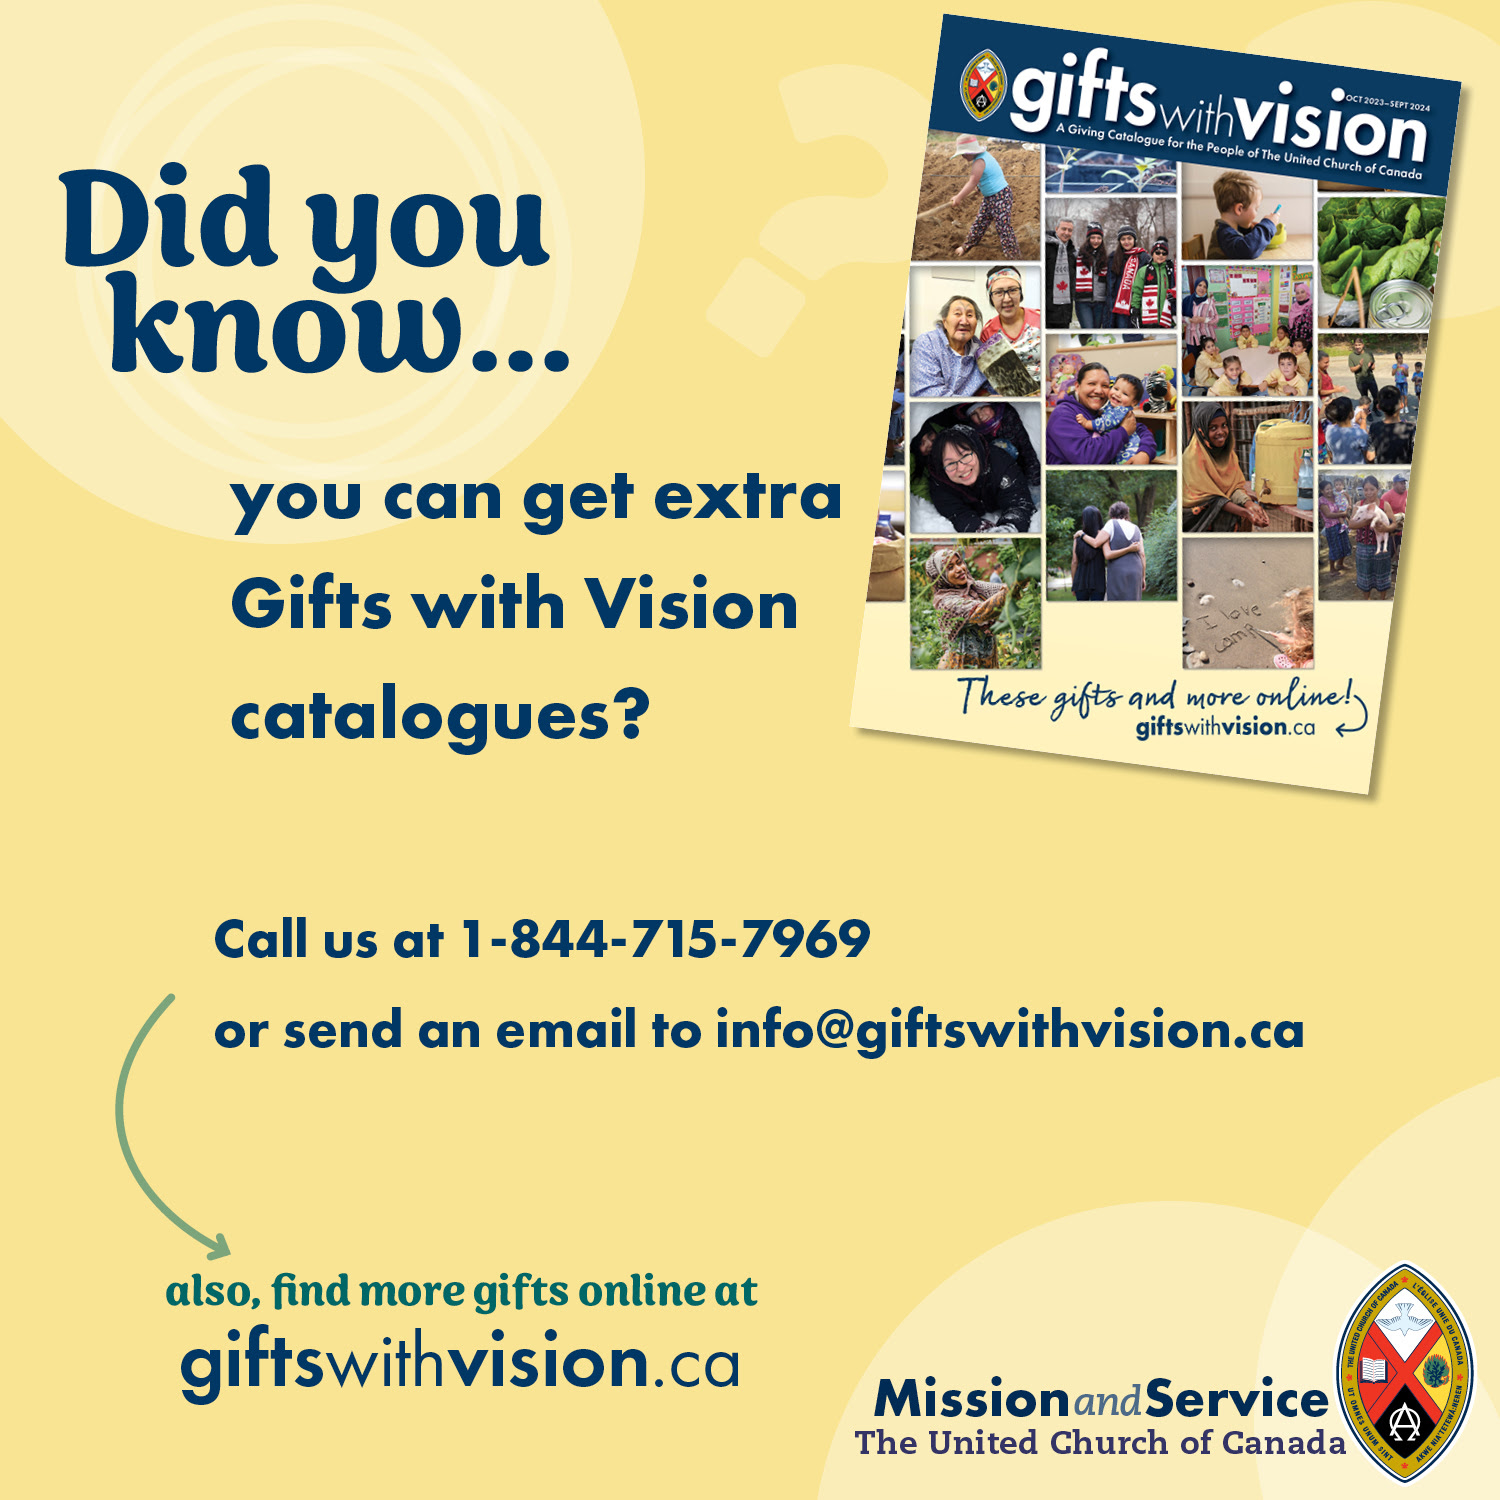 Did you know....you can get extra gifts with Vision catalogues?